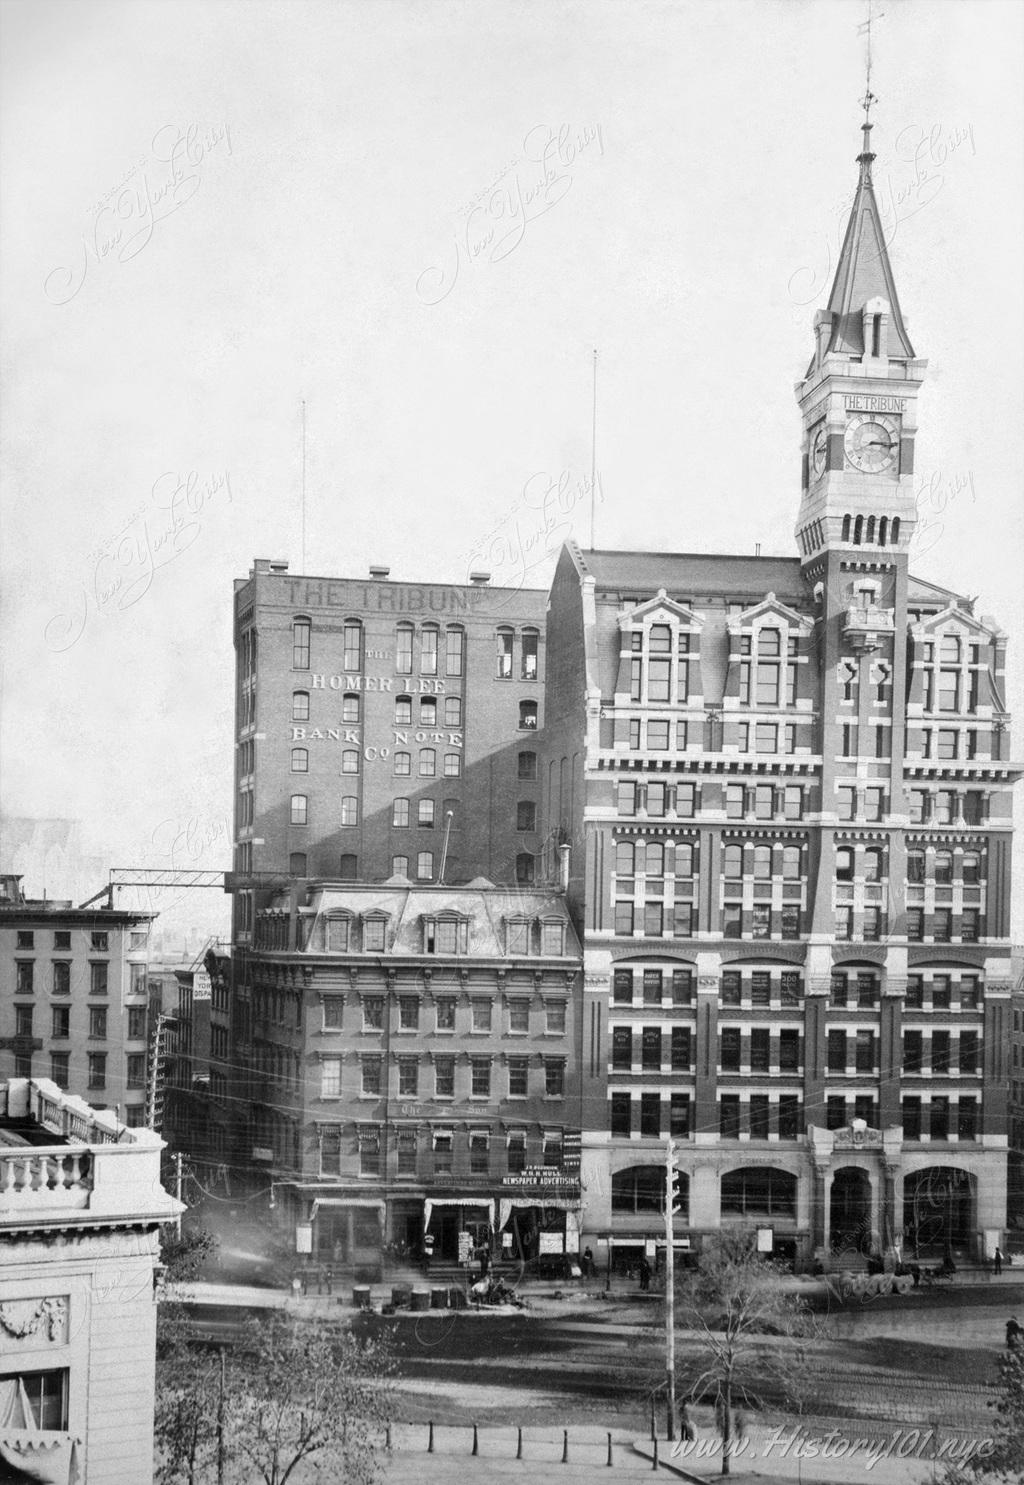 The Tribune Building, on the site of two previous Tribune buildings, was announced in 1873 and completed in 1875 to designs by Richard Morris Hunt.